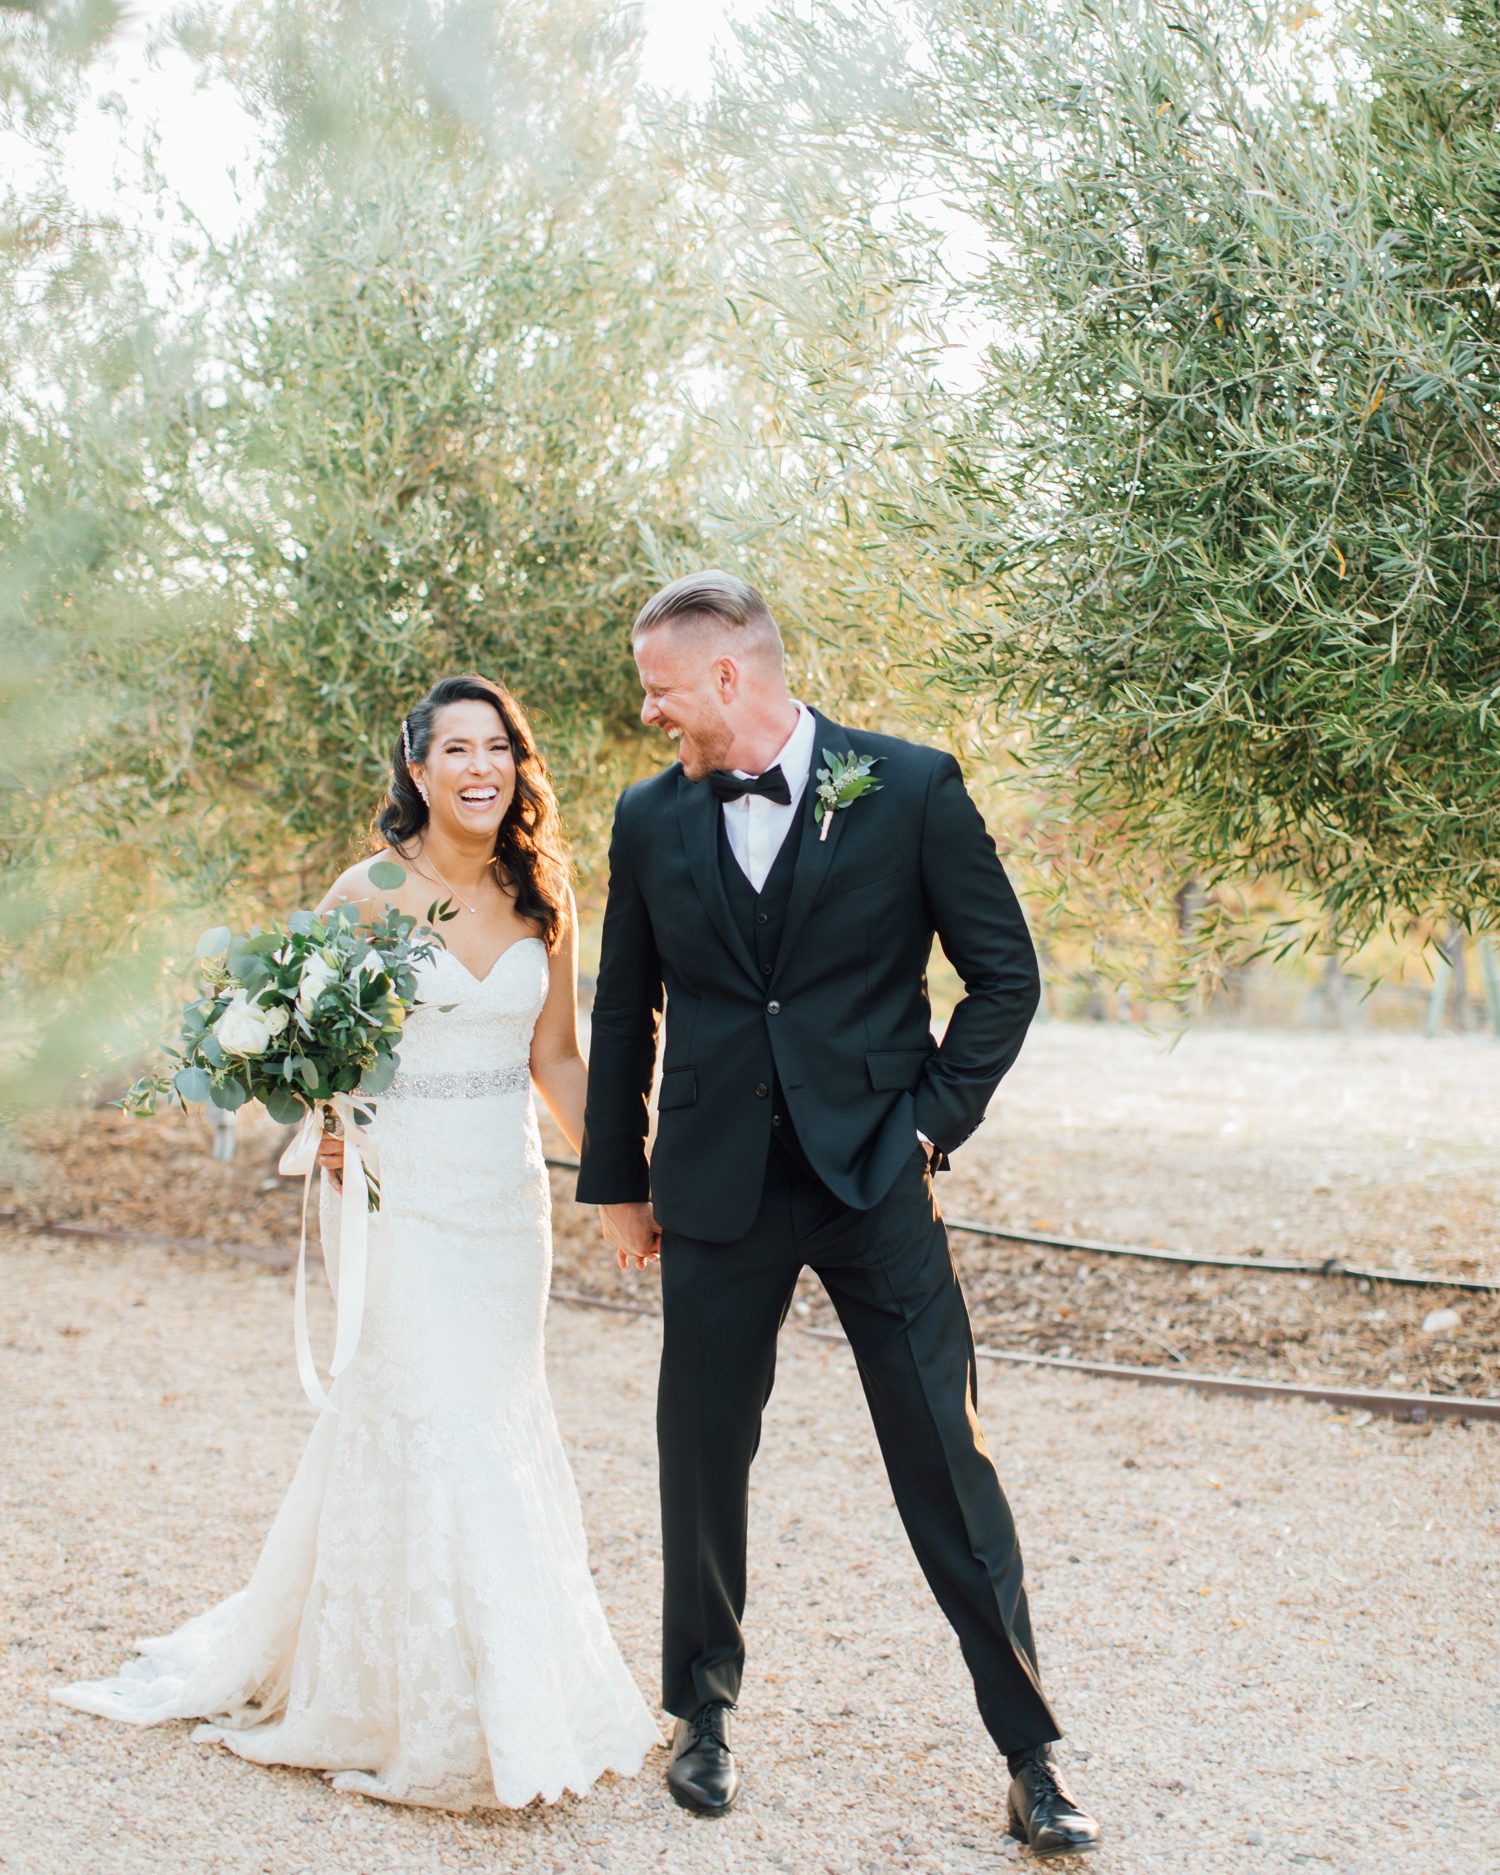 Bride and groom laughing during sunset photos in front of Olive trees at Tuscany Italy inspired wedding at Aterno Estate by photographer Jessica Sofranko